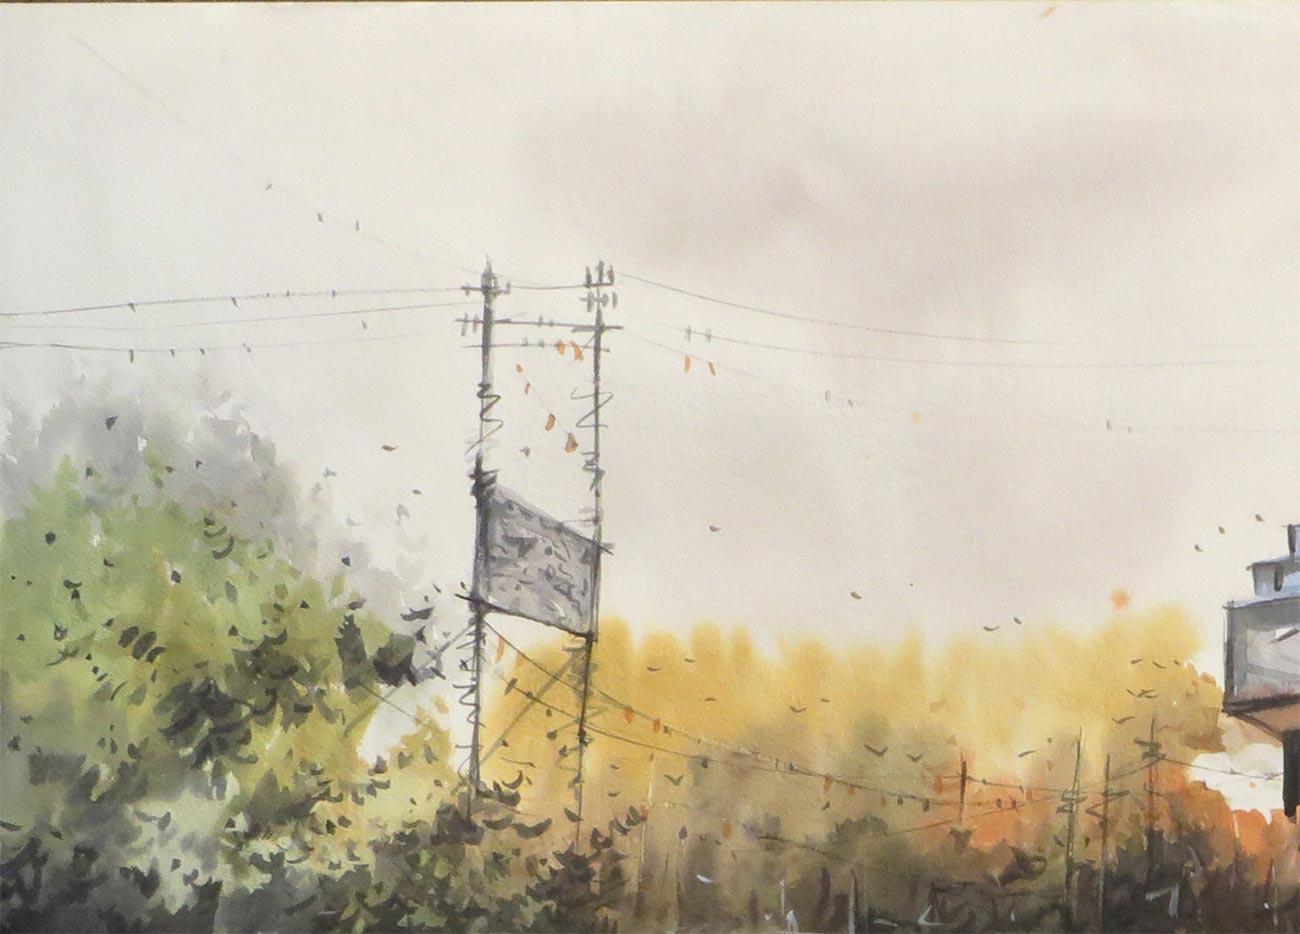 City Scape, City Life, Car, Watercolor on Paper by Indian Artist 